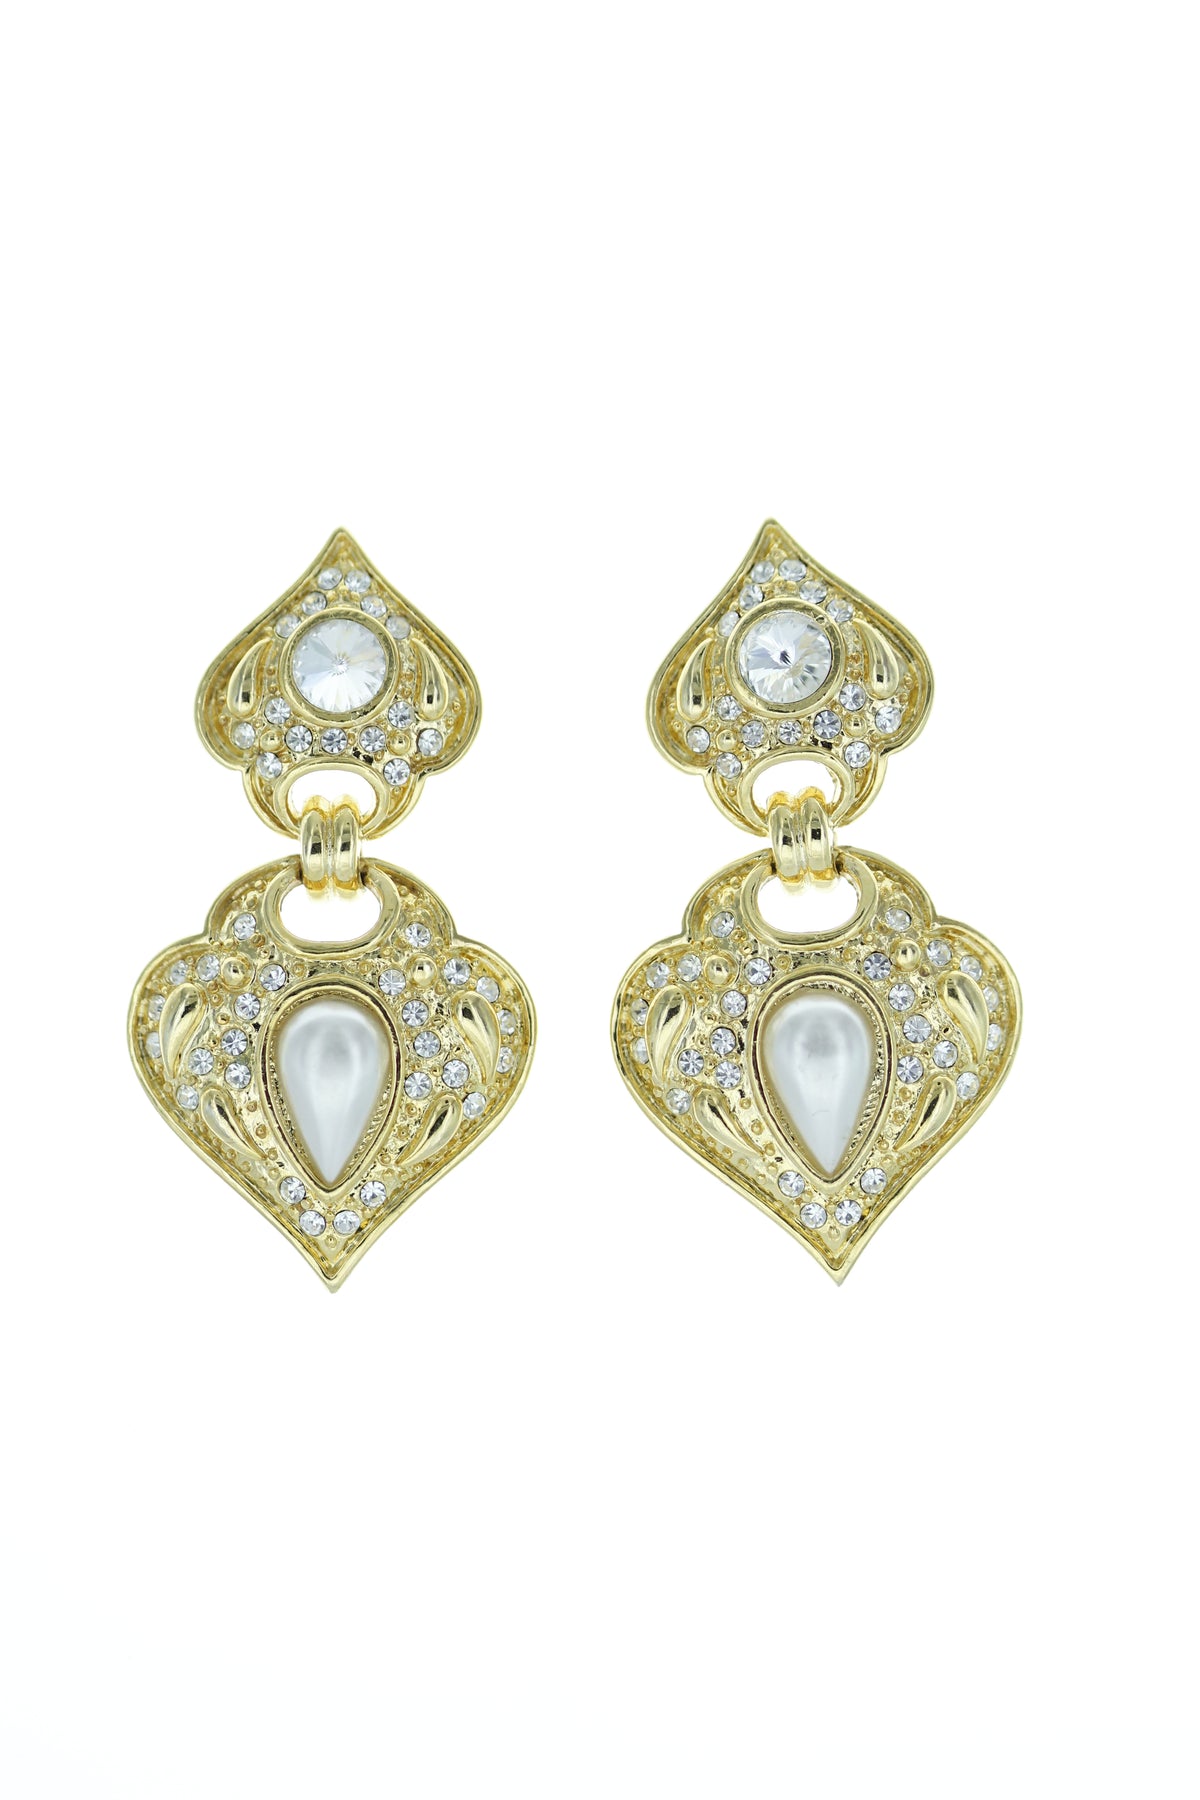 30992 Wholesale Gold Alloy Earrings with Synthetic